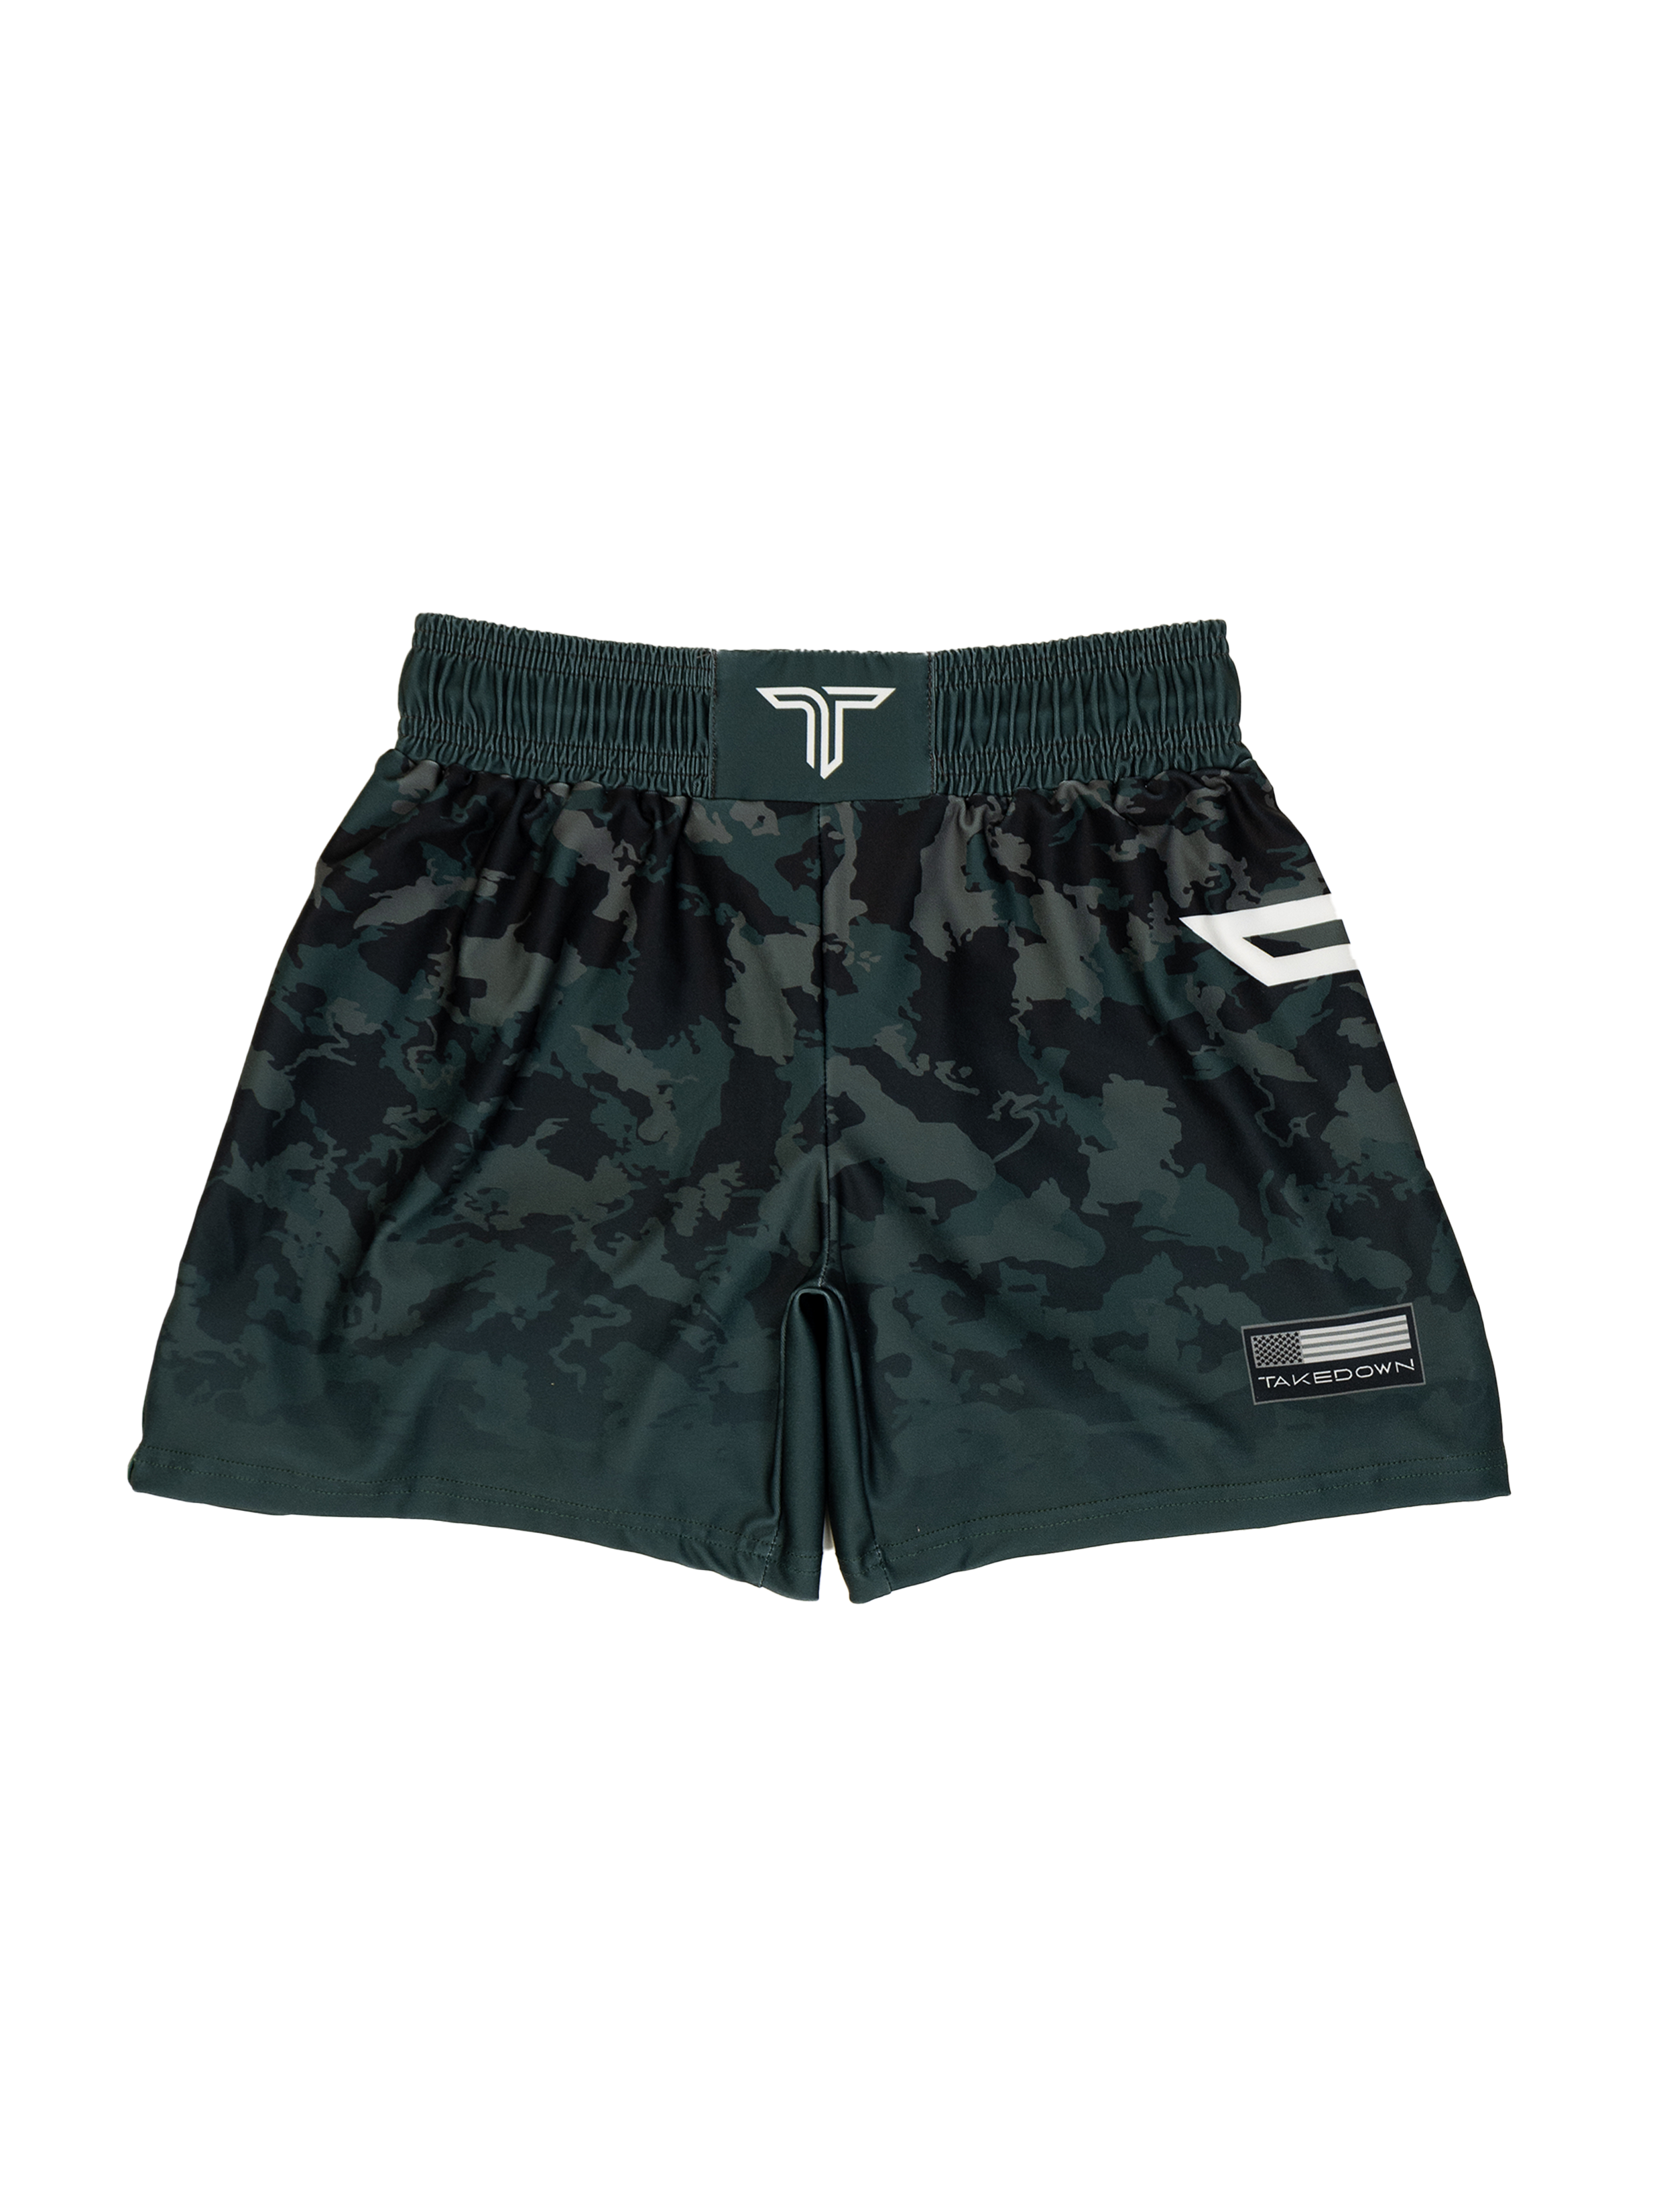 Particle Camo Fight Shorts - Moss (5